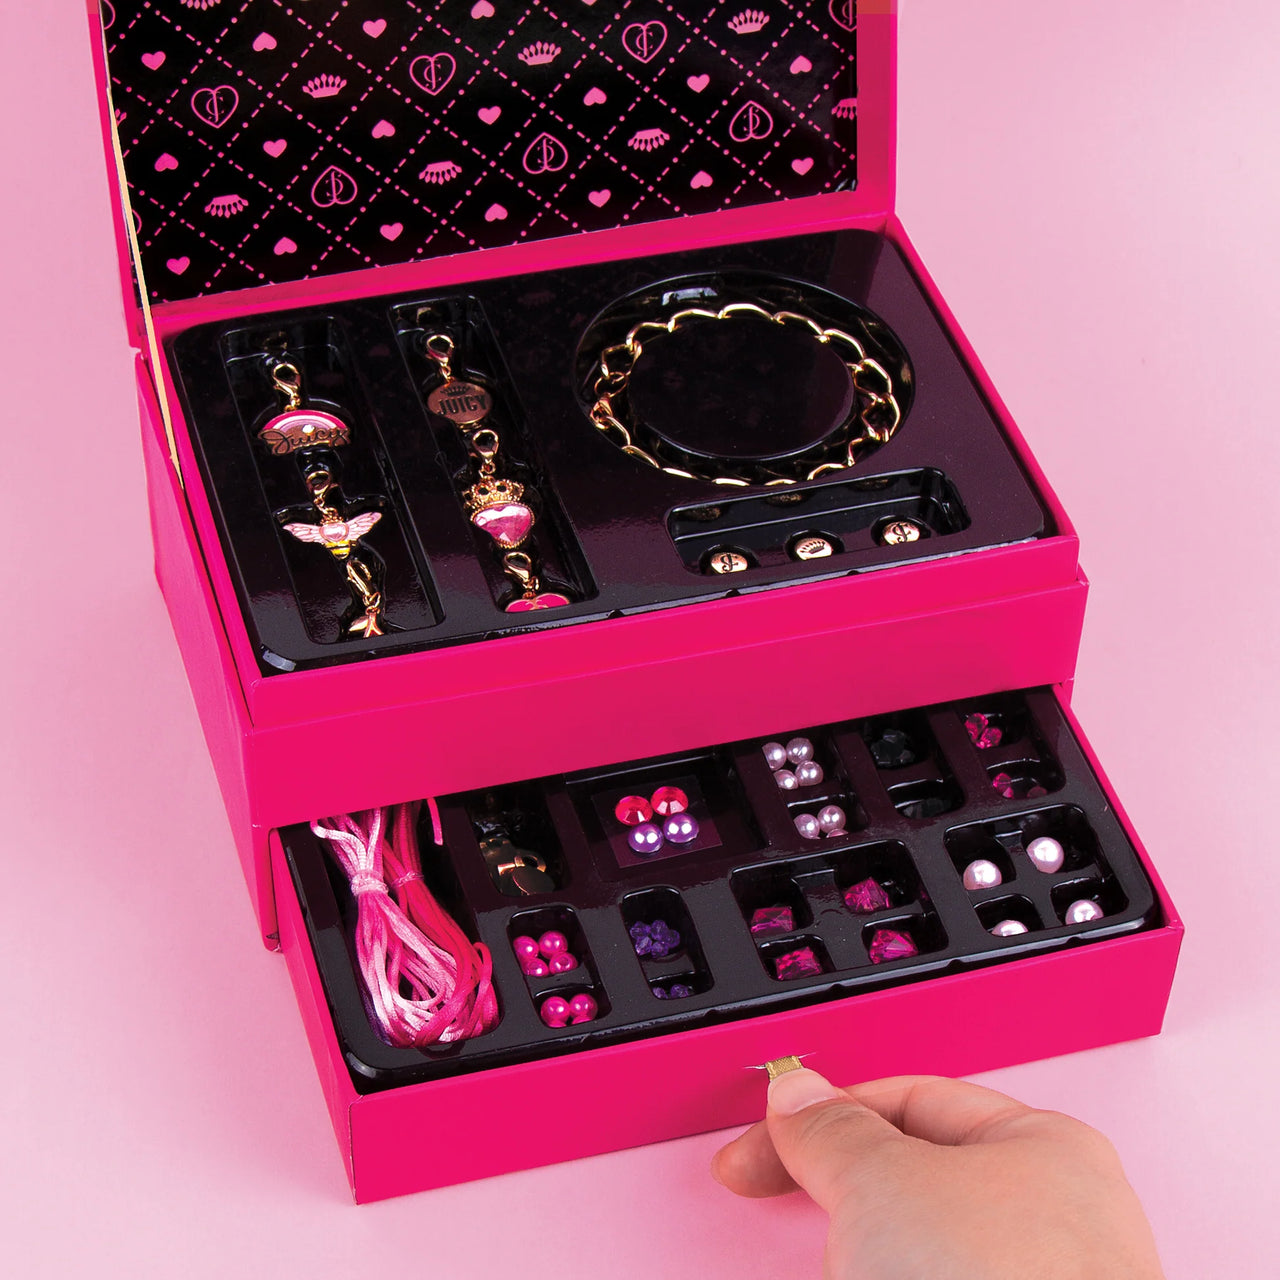 Make It Real Juicy Couture Glamour Jewelry Box